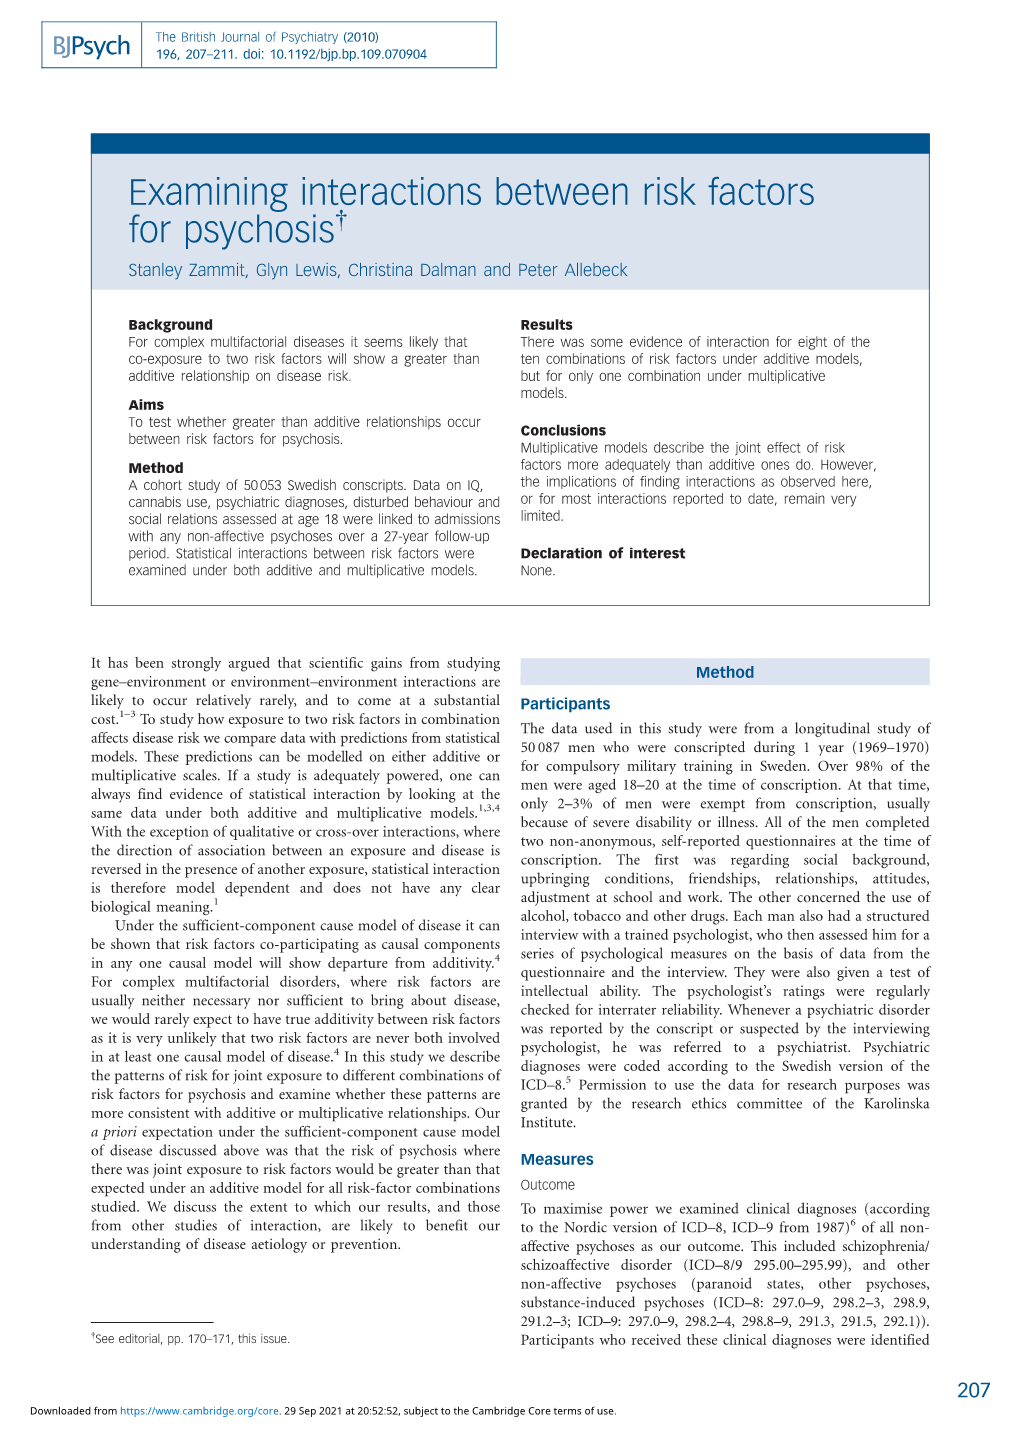 Examining Interactions Between Risk Factors for Psychosis{ Stanley Zammit, Glyn Lewis, Christina Dalman and Peter Allebeck